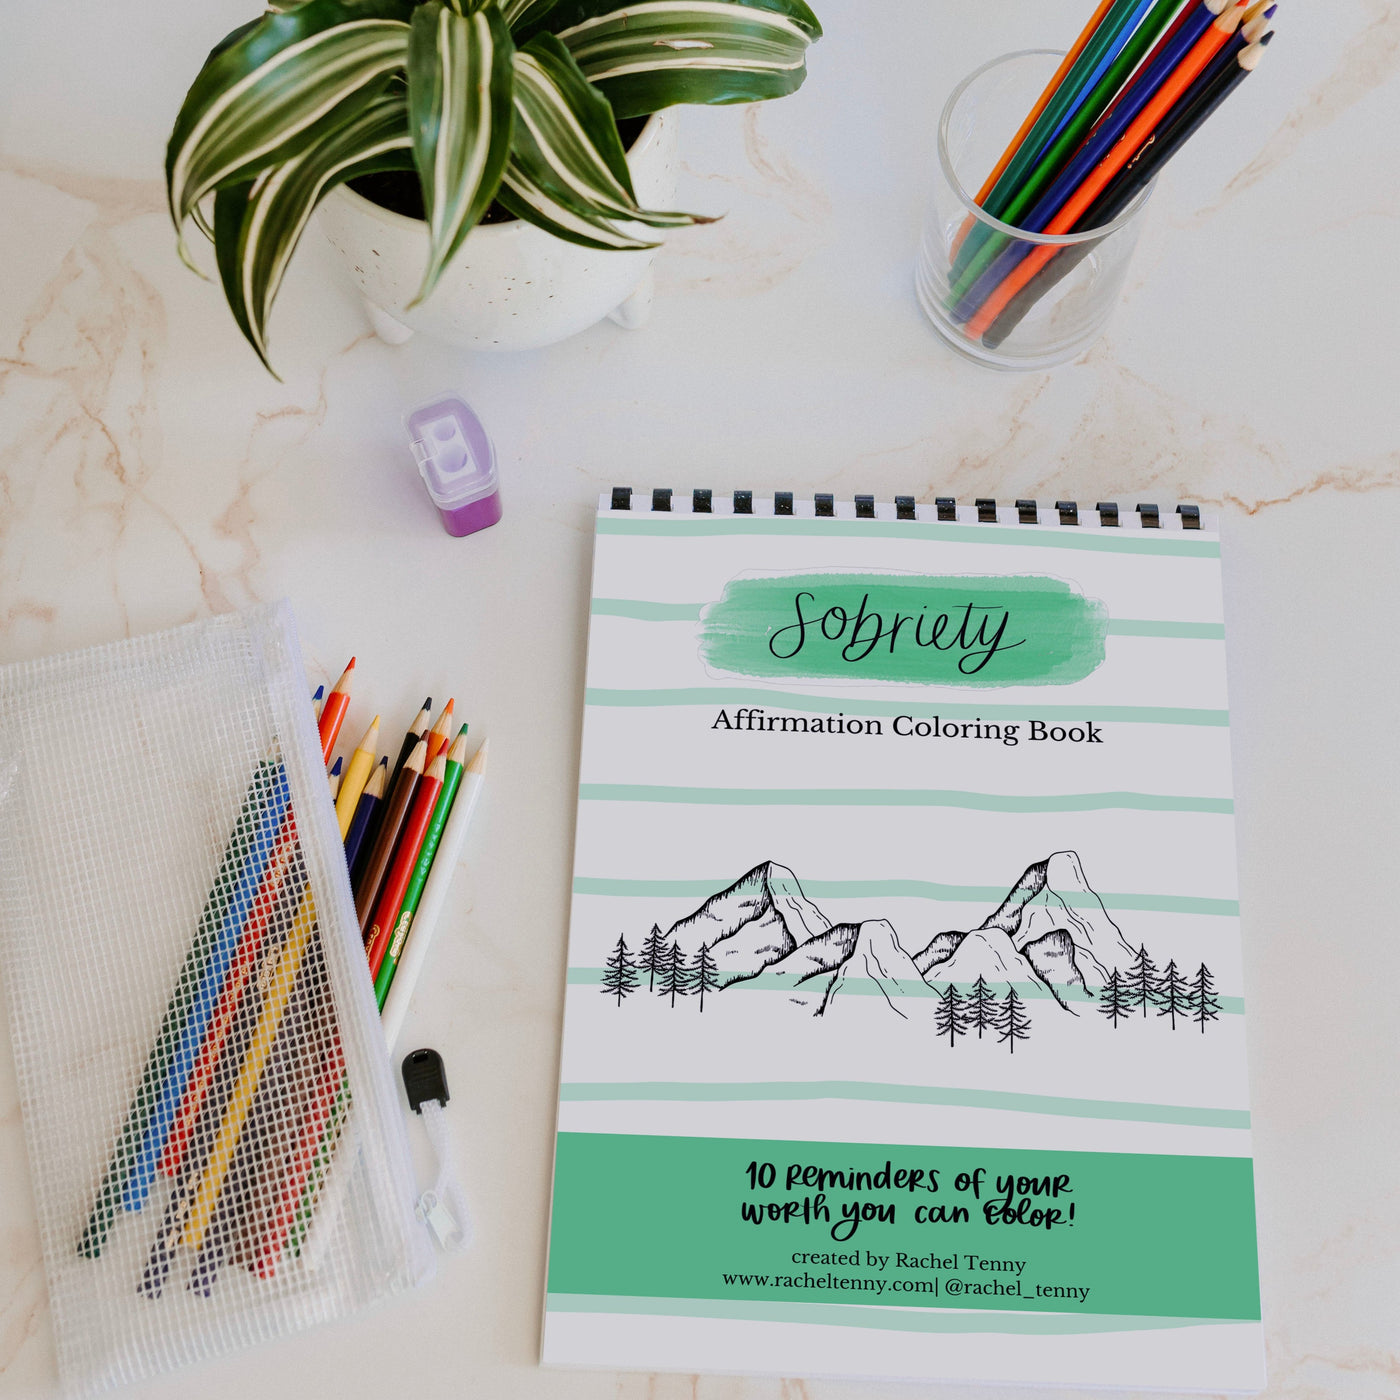 Sobriety Affirmation Coloring Book | Colored pencil & pouch set